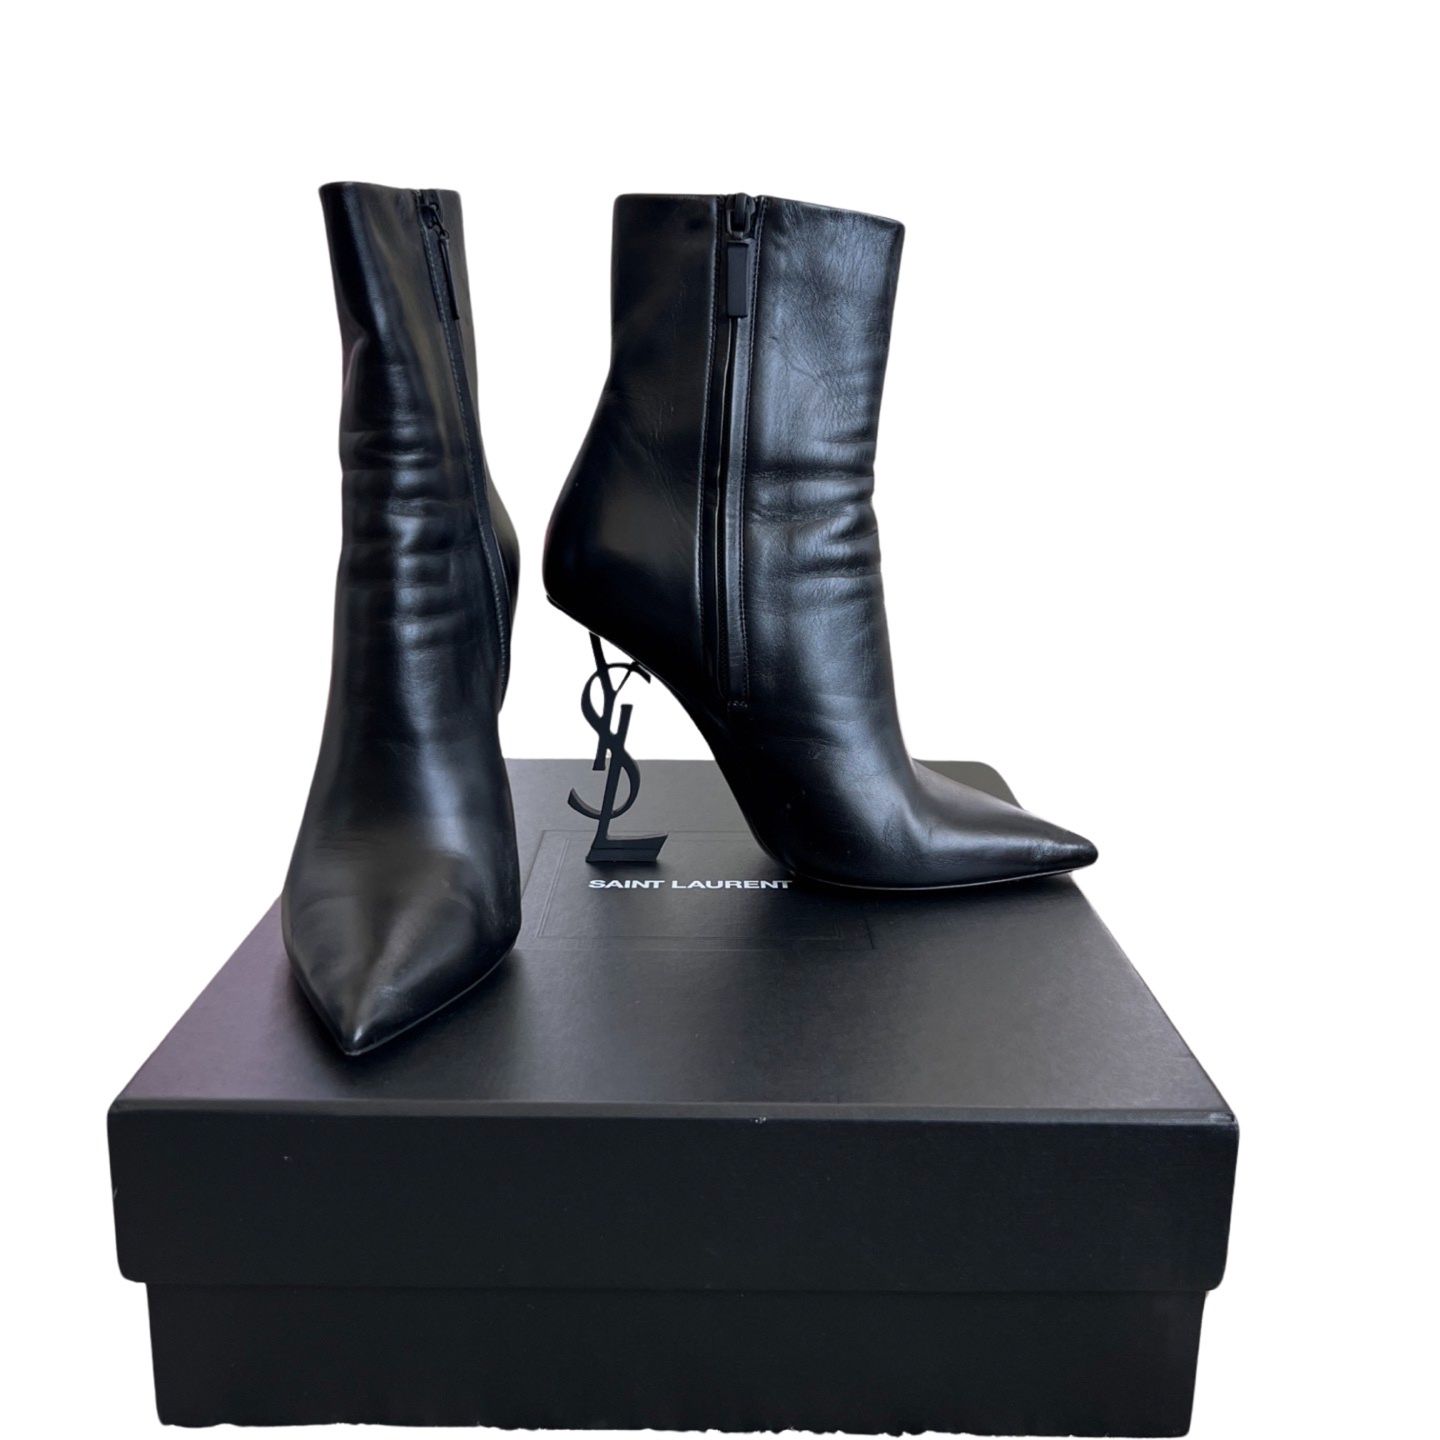 YSL OPYUM BOOTIES IN LEATHER SZ 38